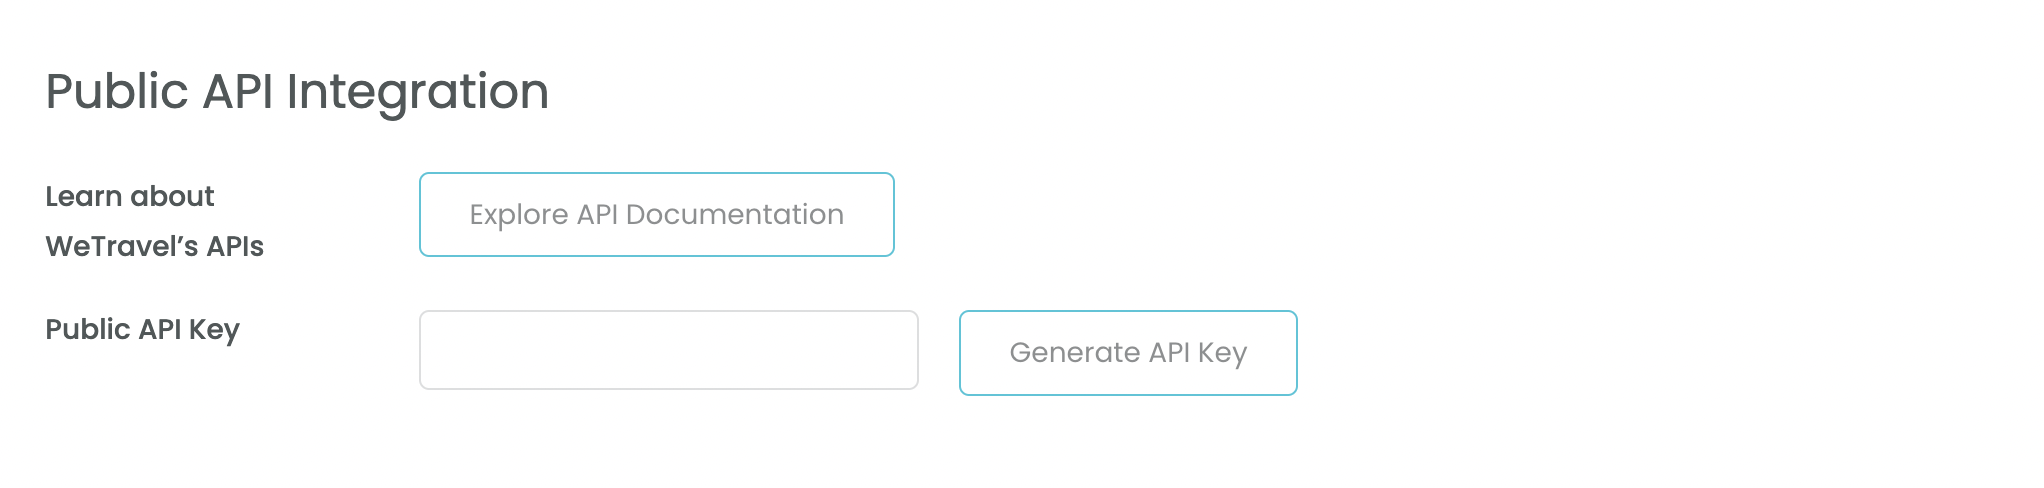 API integration section in profile